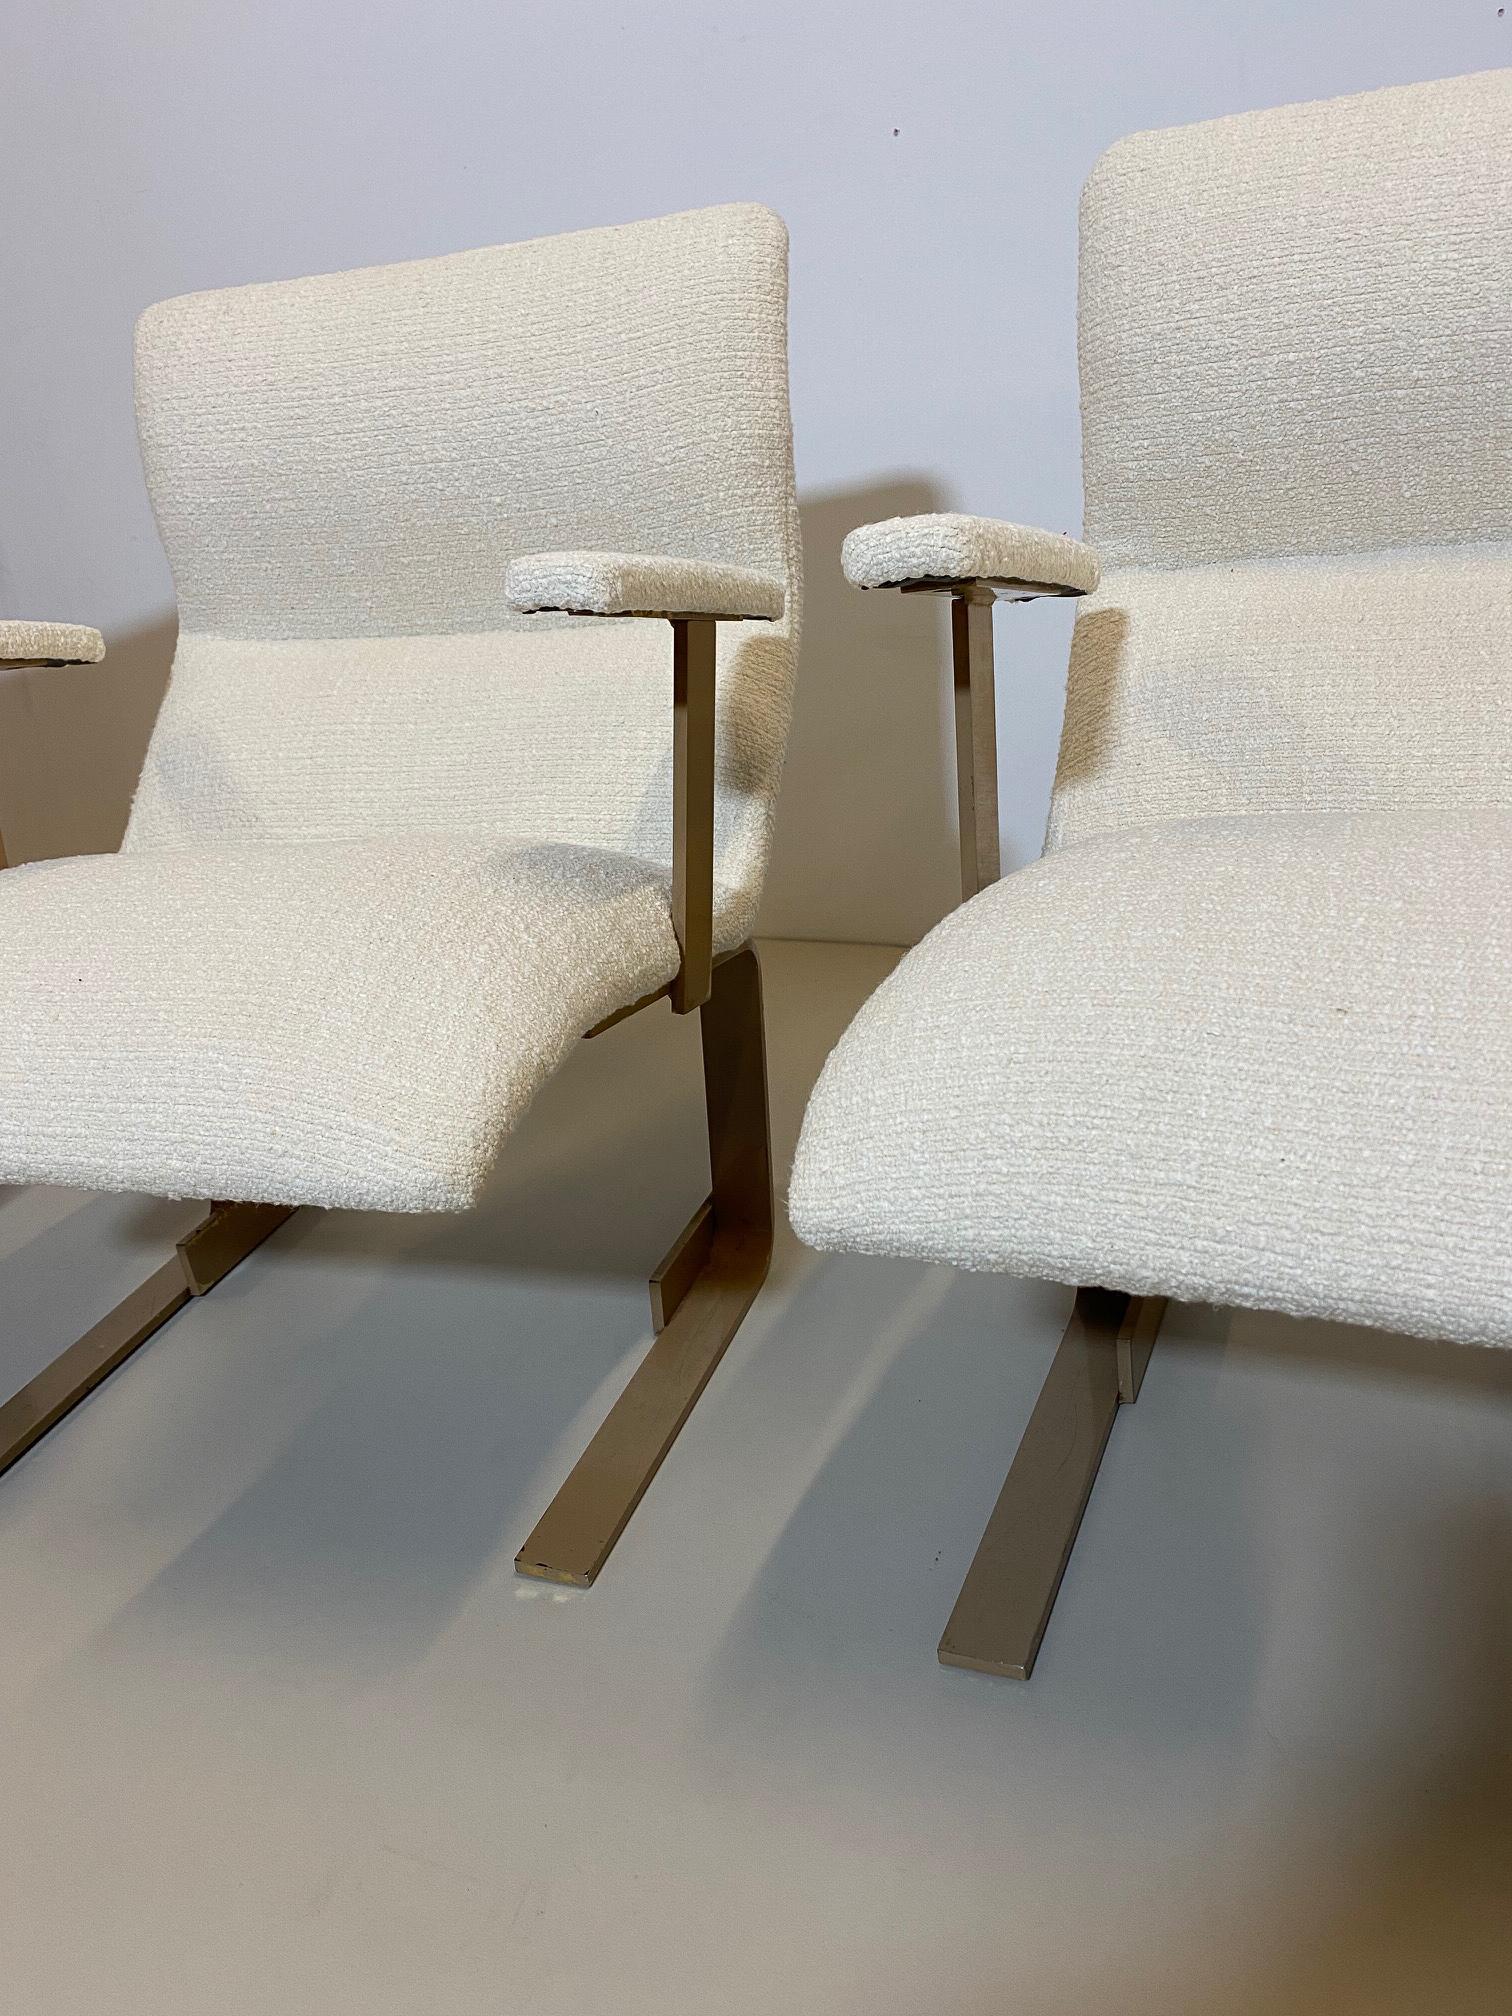 Late 20th Century Mid-Century Modern Pair of Italian Armchairs, White Bouclette Fabric, 1970s For Sale